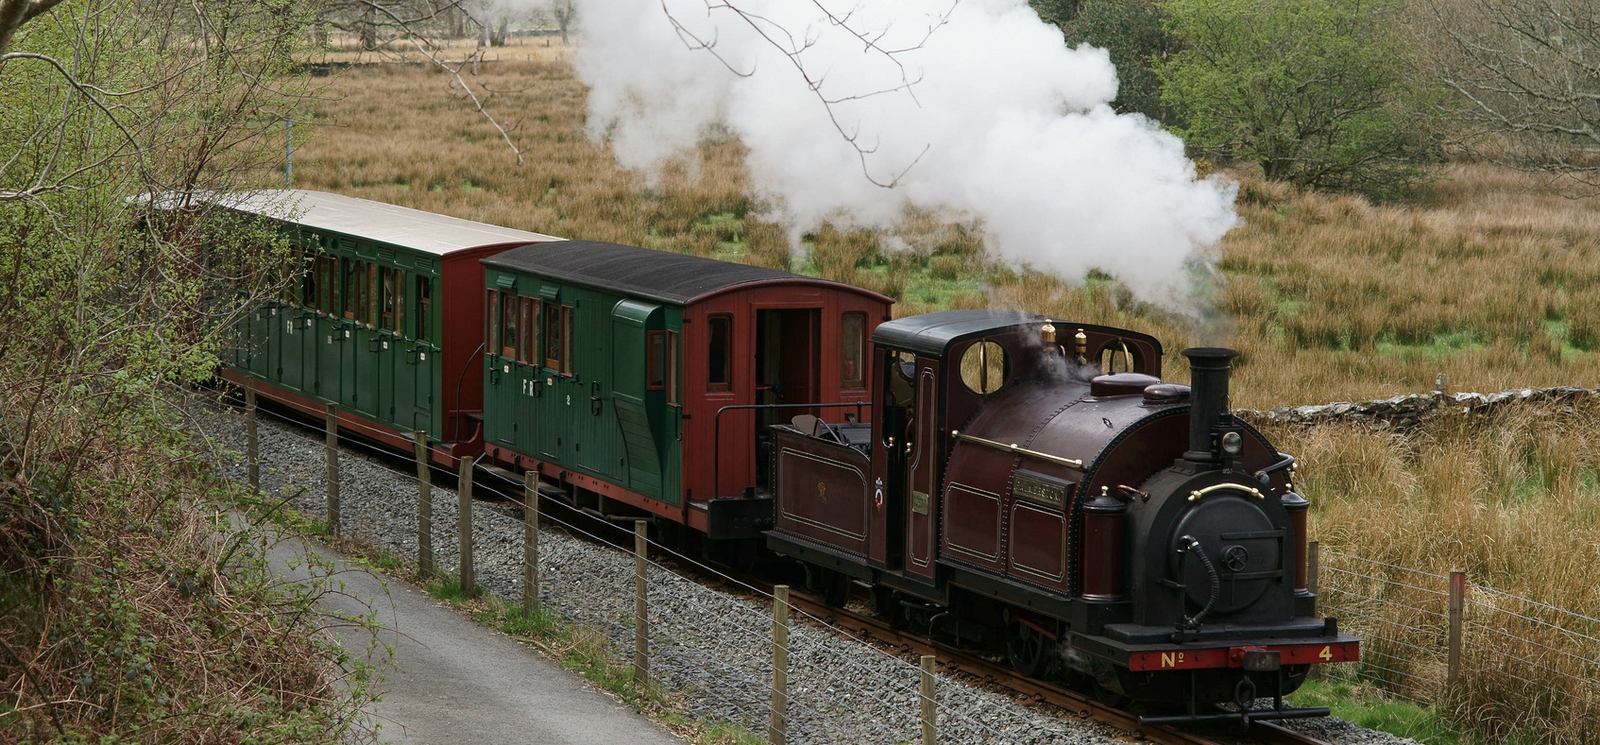 No. 4 “Palmerston” in May 2013